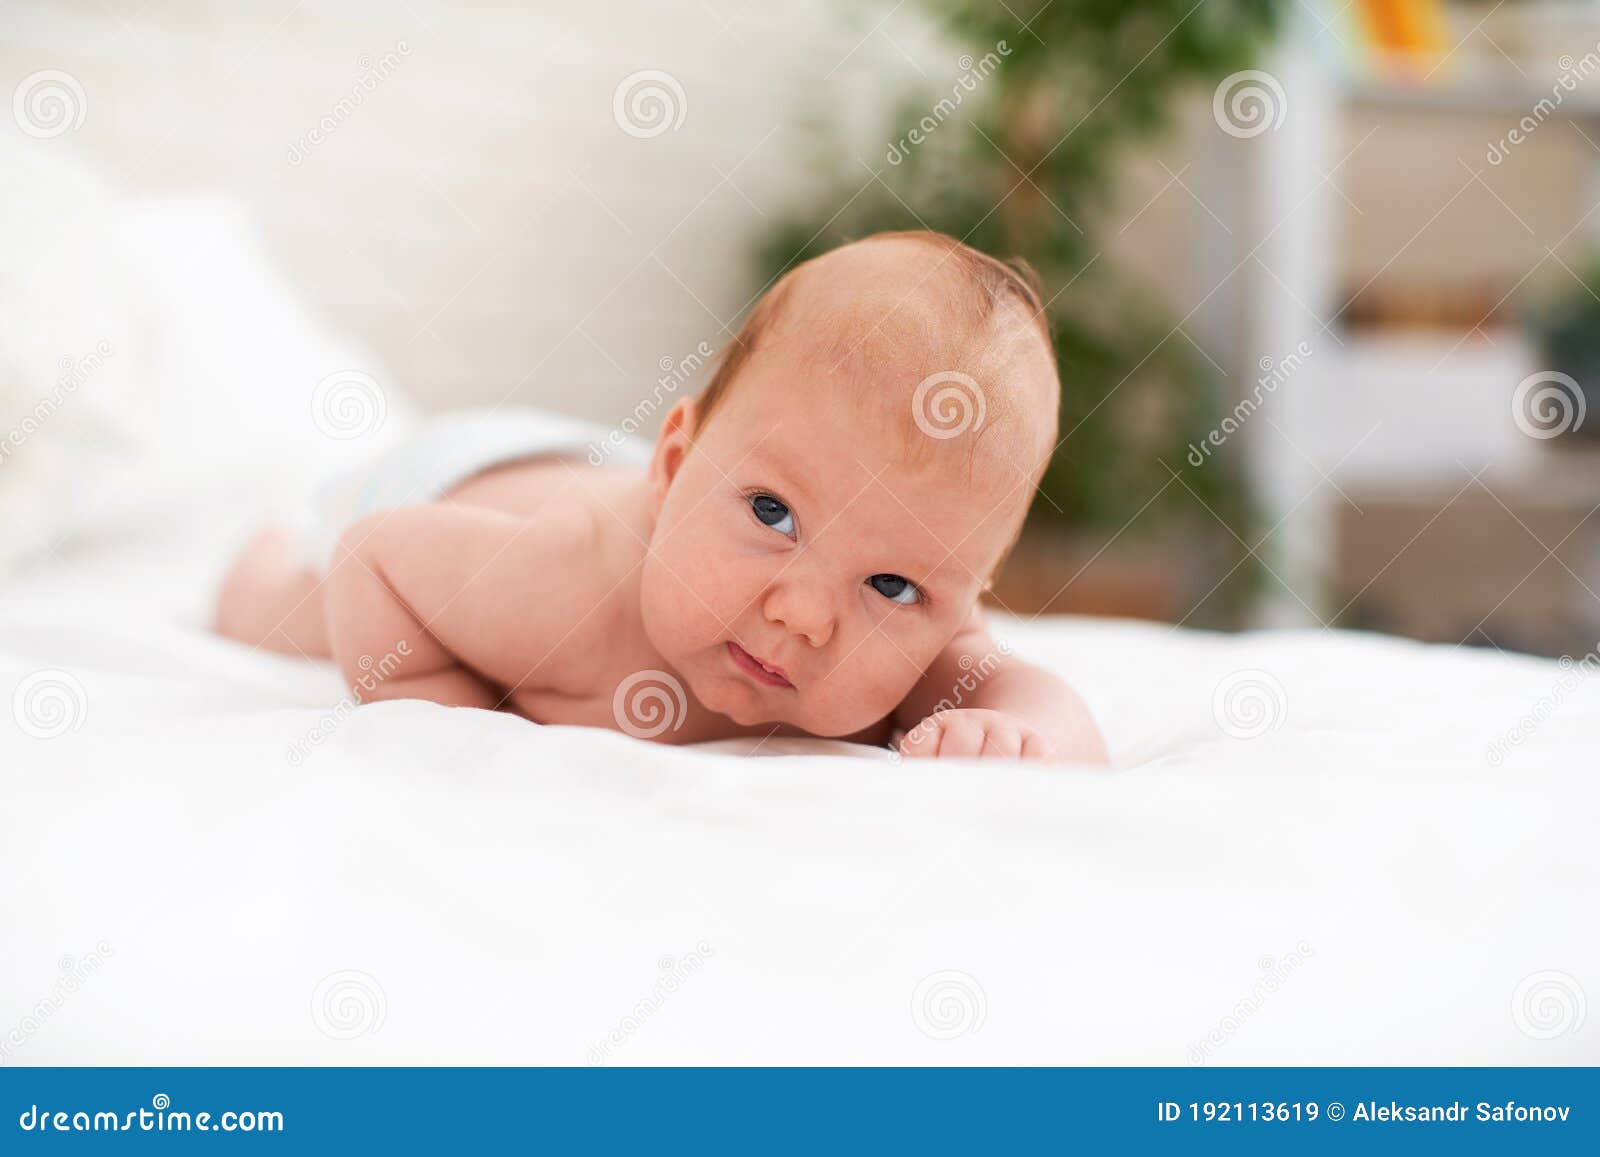 Cute Plump Caucasian Baby Of 4 Months Lies On His Stomach And Looks